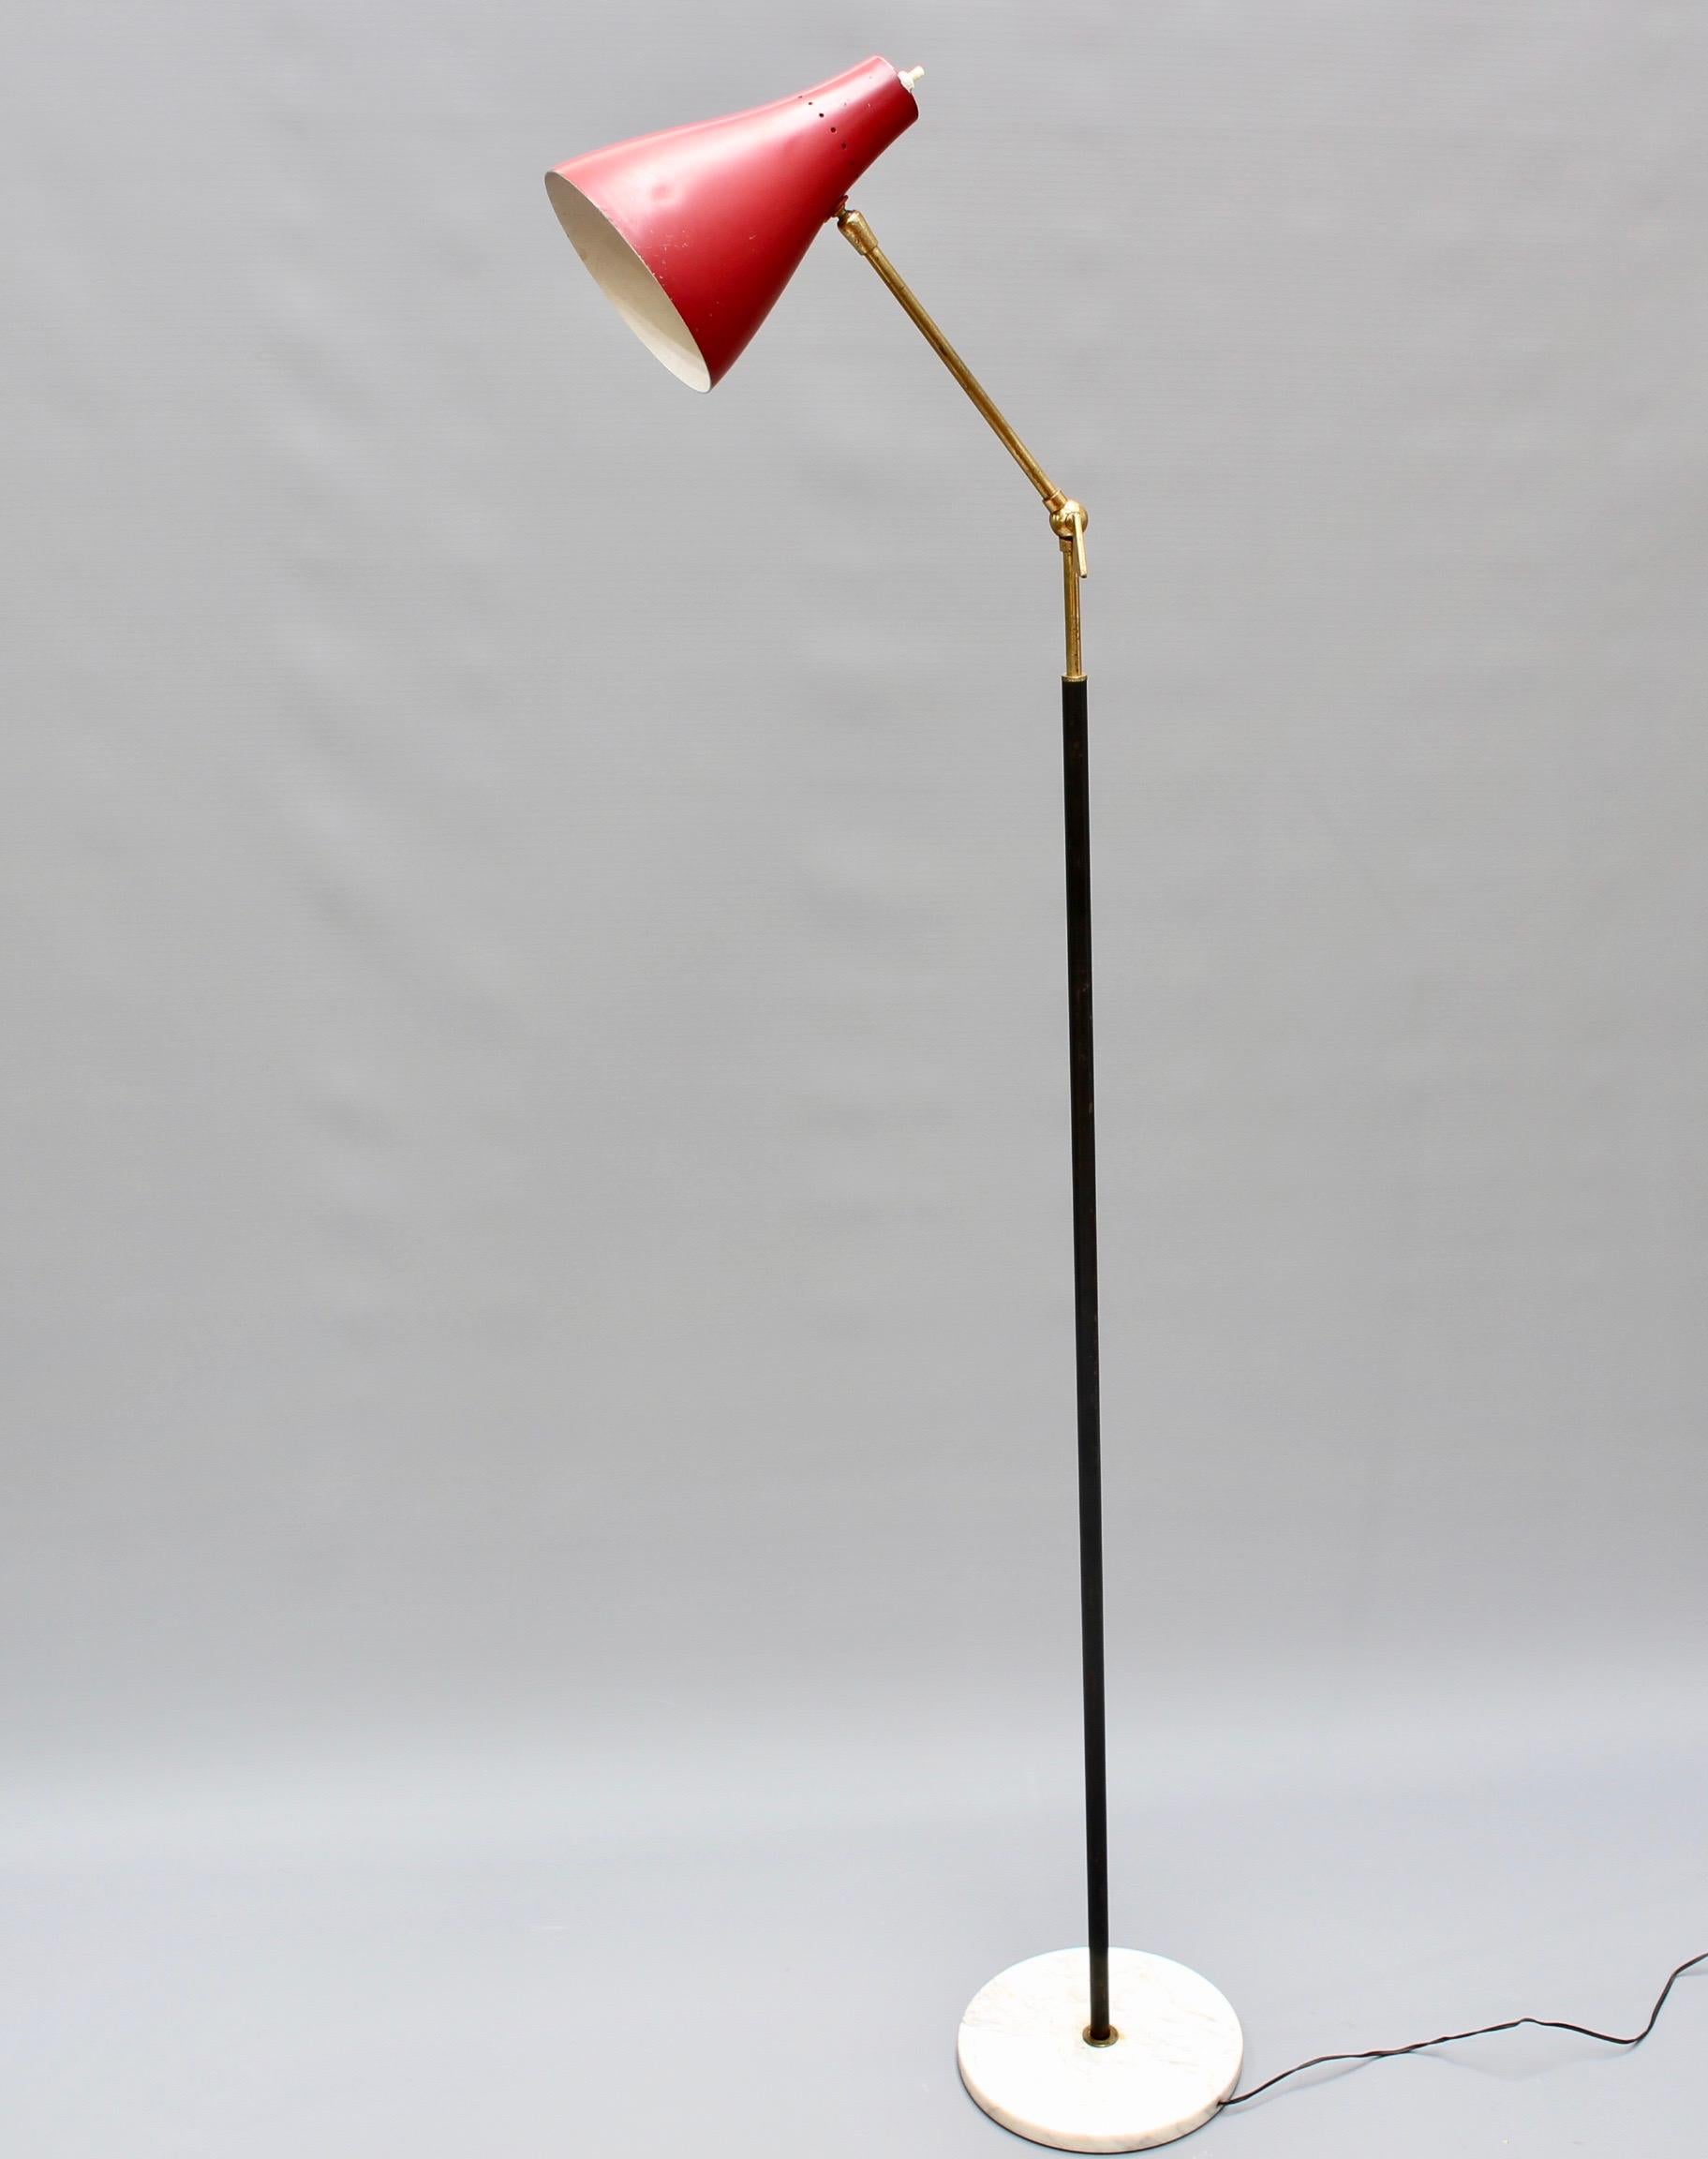 Midcentury Italian floor lamp from Stilnovo (circa 1950s). Italian design at its best, this is a floor lamp with adjustable angle for reading or spotlighting. The base of the lamp is a round of Carrara marble. The original red light cover is conical